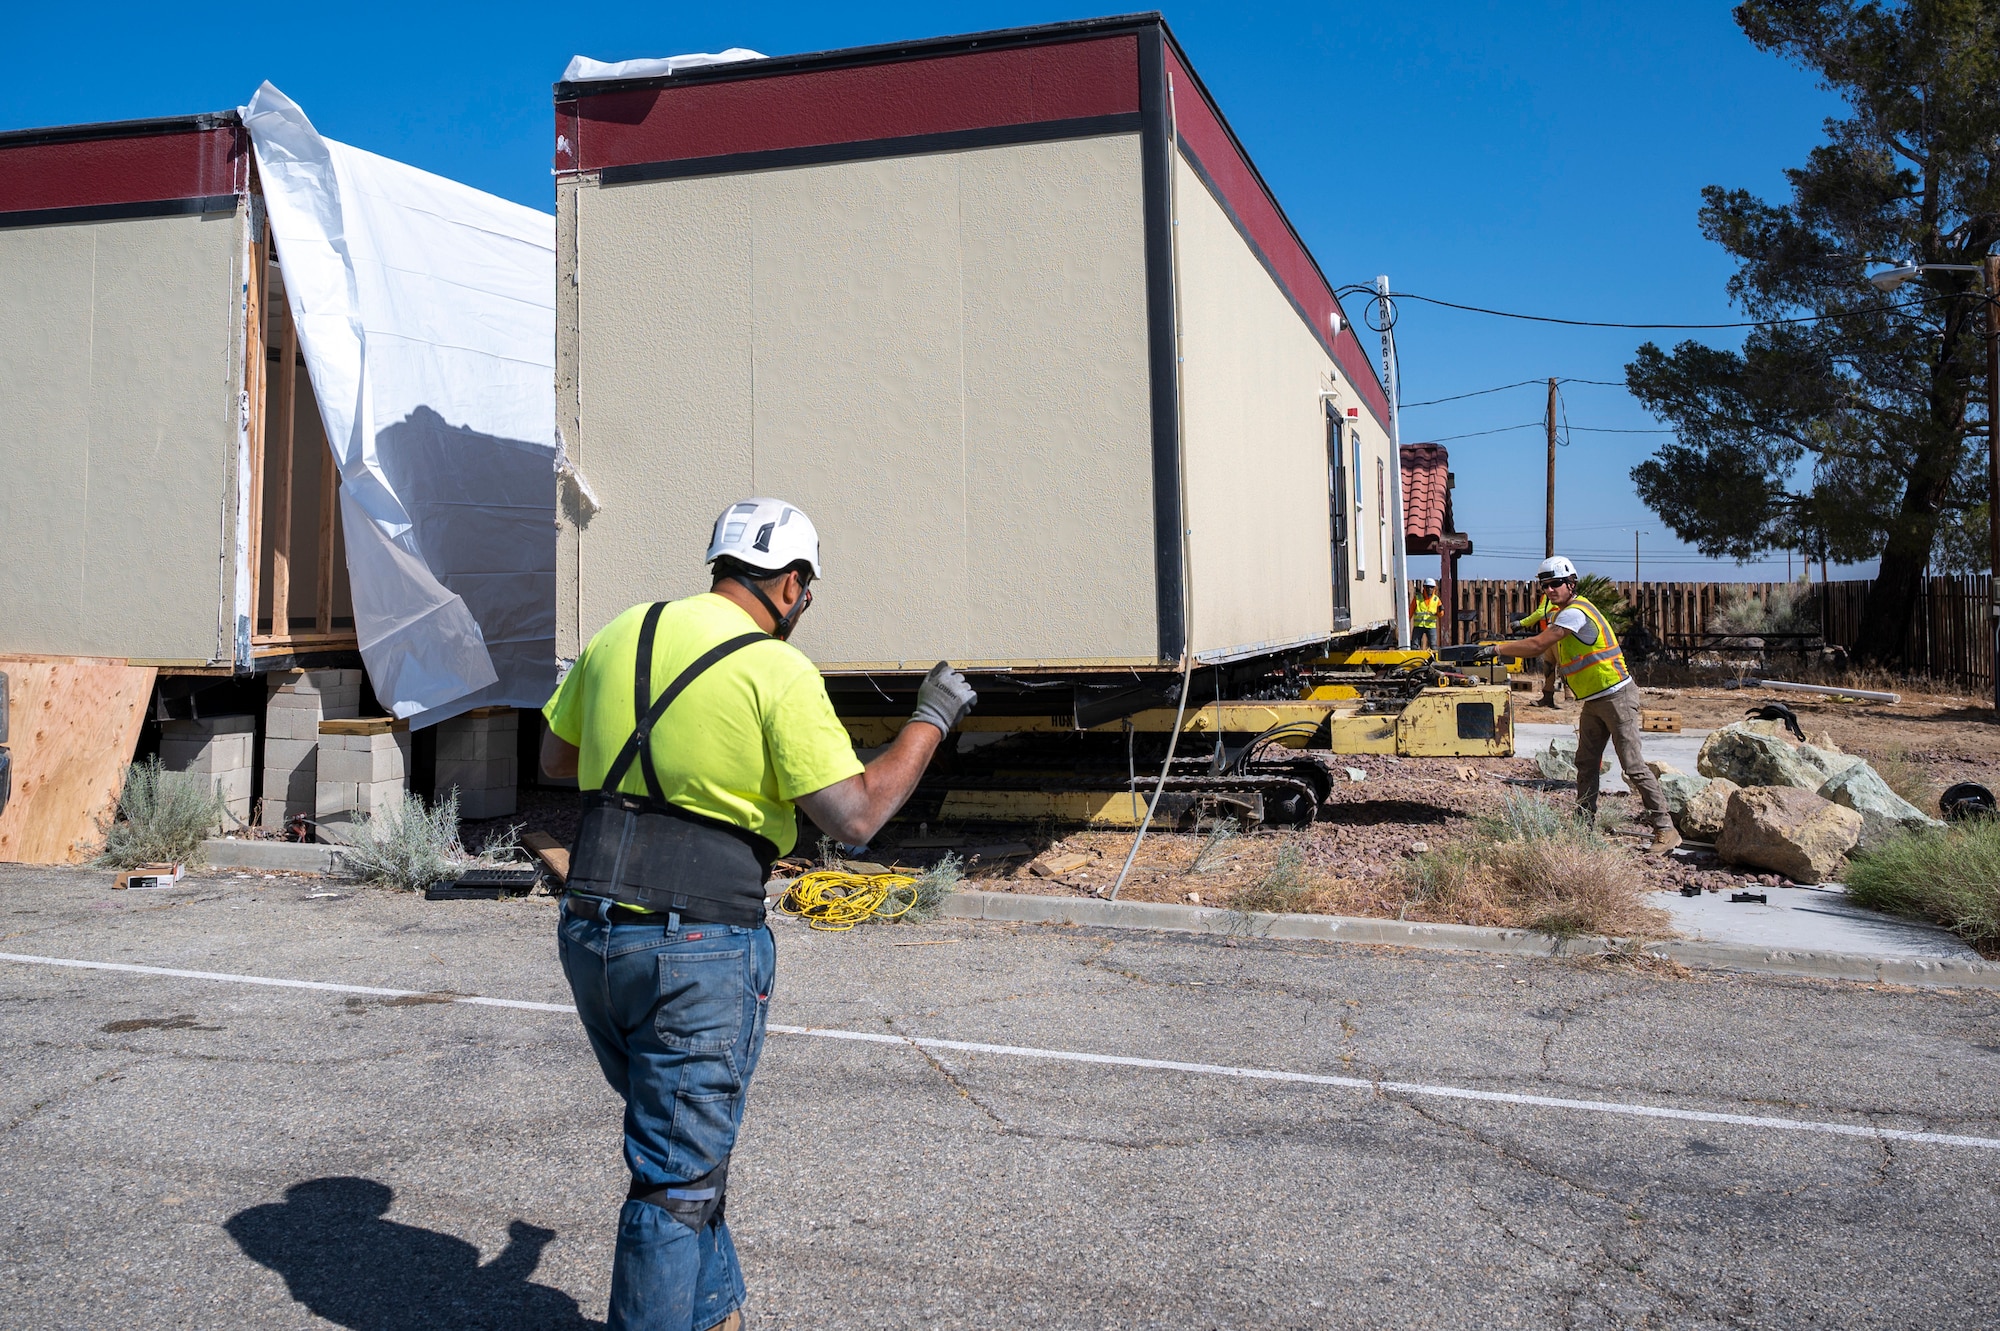 Ground crews move a temporary office building used during the 412th Medical Group's Medical Facilities Modernization Project on Edwards Air Force Base, California, June 2. (Air Force photo by Harley Huntington)